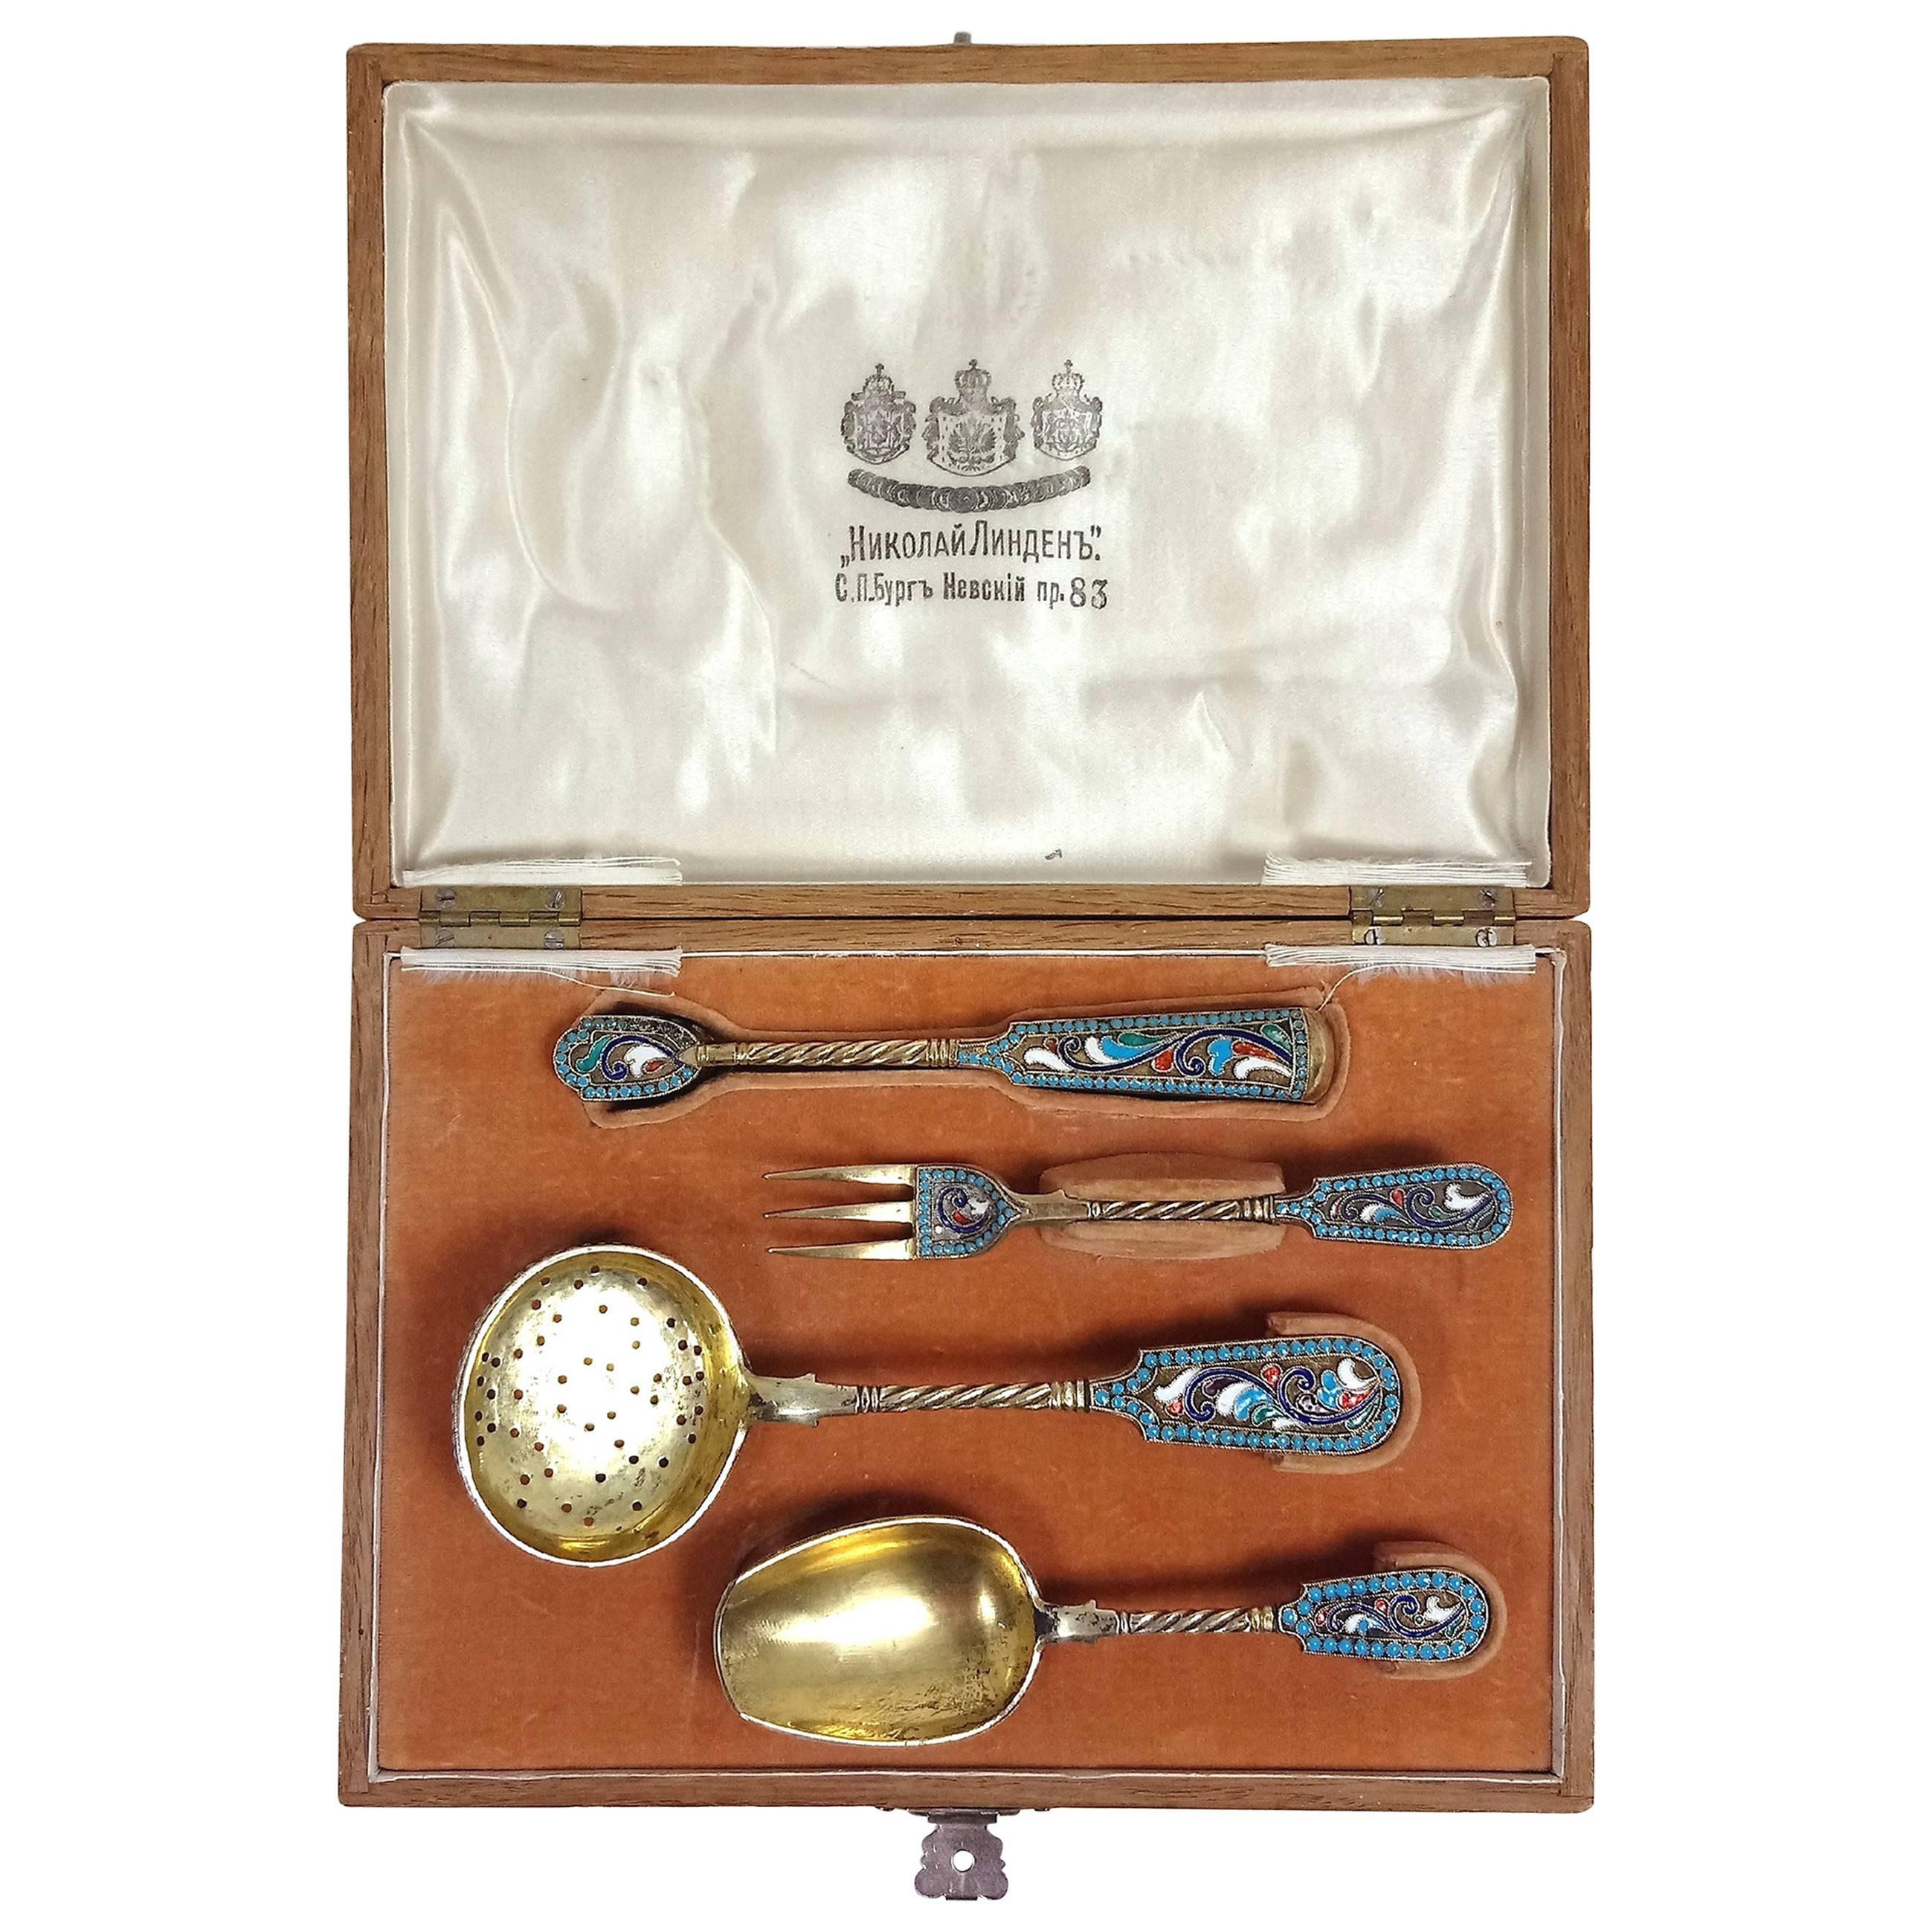 Late 19th Century Russian Silver Gilt and Champlevé Enamel Tea Serving Set